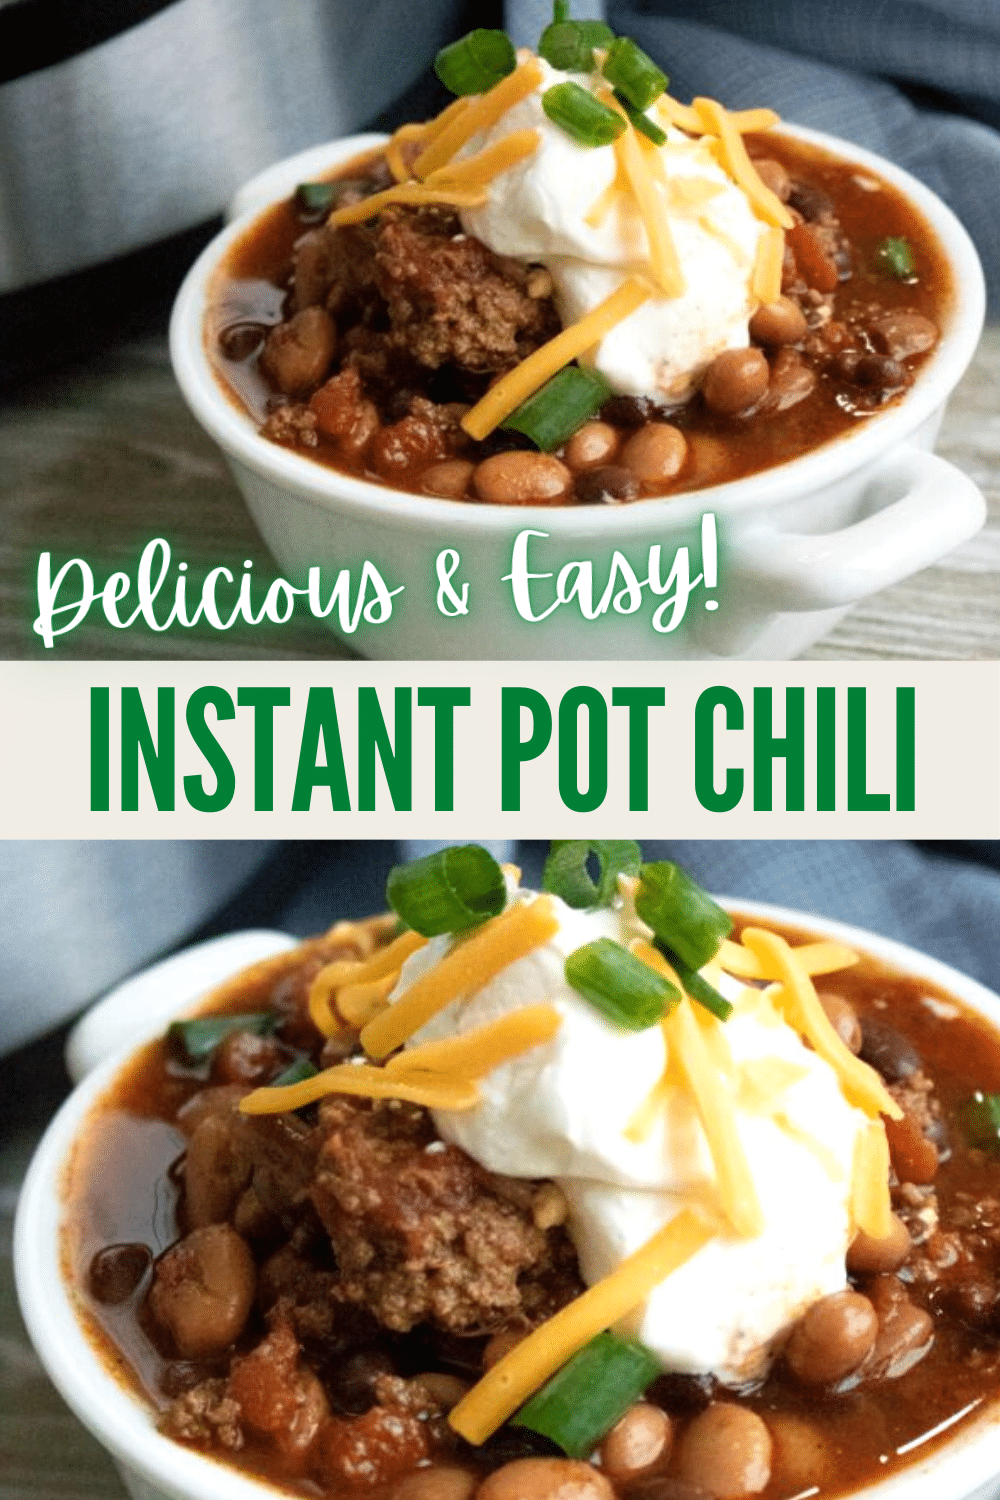 This Instant Pot Chili is full of flavor and so easy to make. Perfect for an easy weeknight dinner or when you need to serve a group. #instantpot #pressurecooker #chili #easydinner via @wondermomwannab